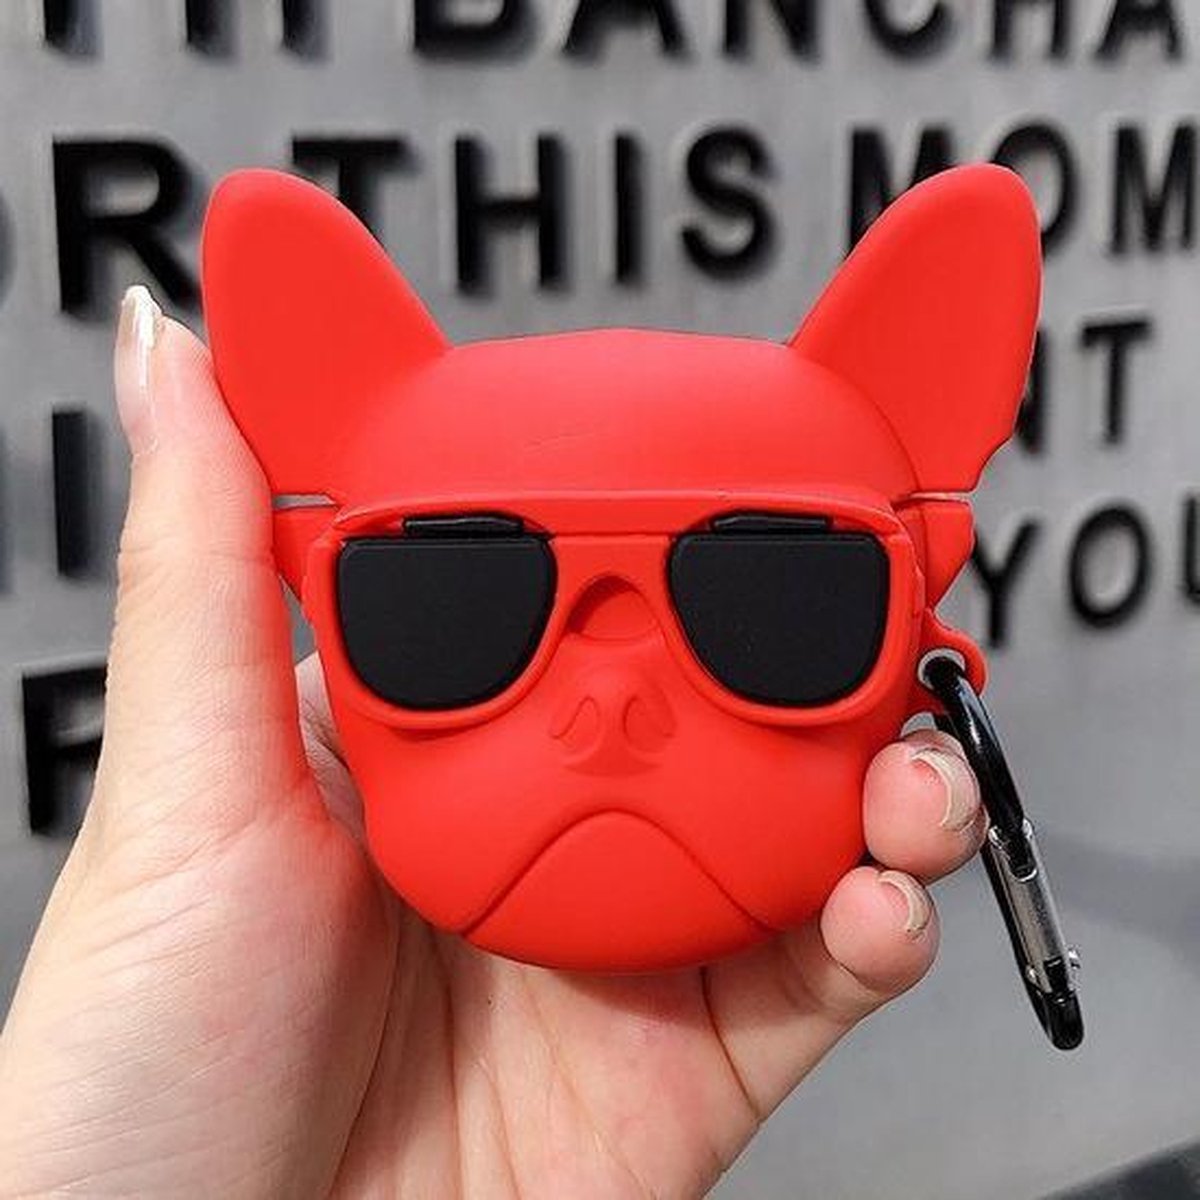 Airpods Hoesje - Airpods Case - Dieren - French Bulldog - Frenchie - Rood - Sinterklaas Cadeautjes - Schoencadeautjes Sinterklaas